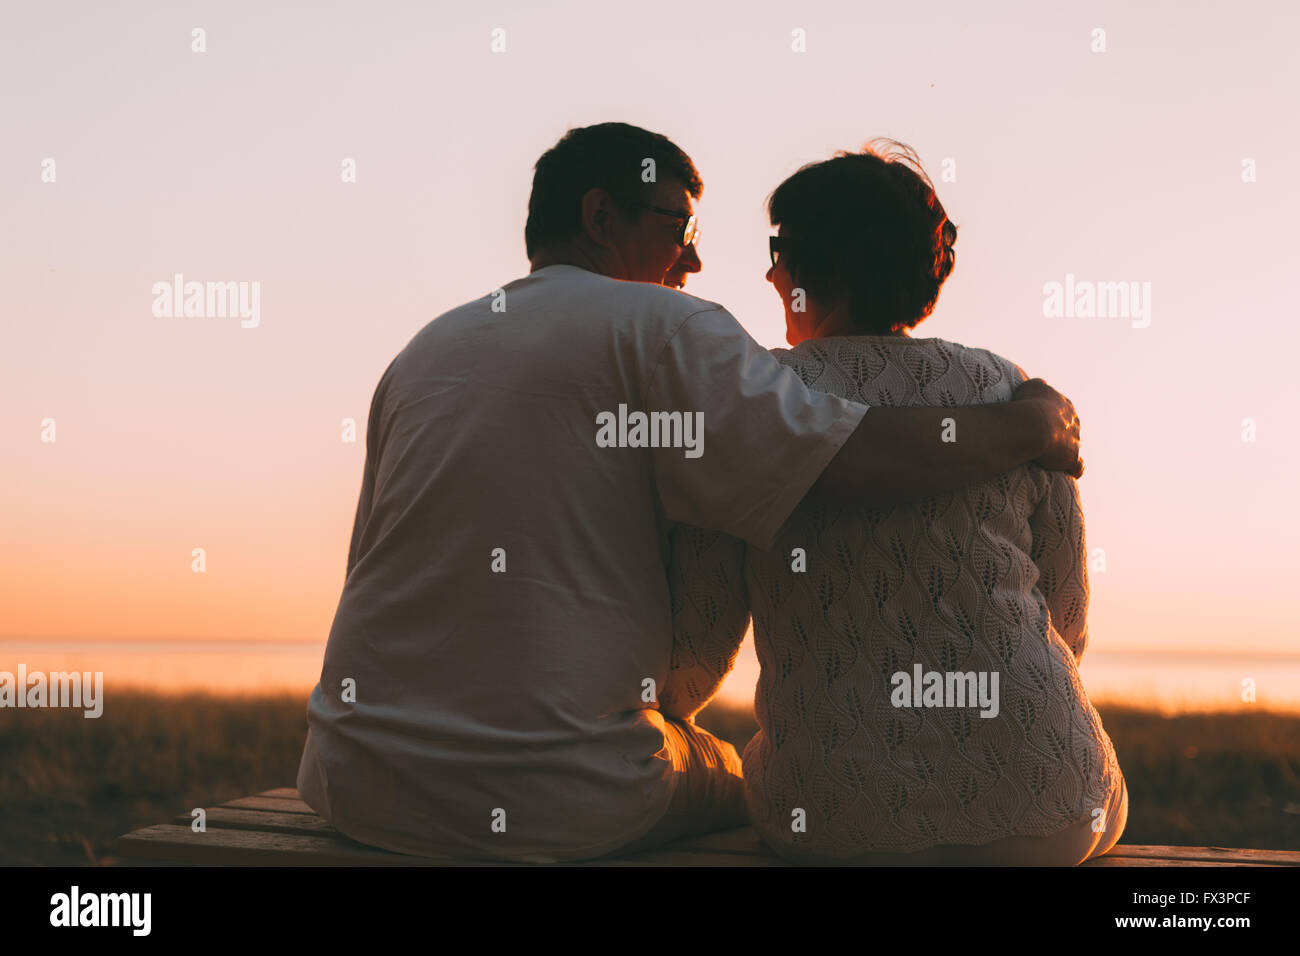 Adult couple embracing at sunset and sea. Stock Photo